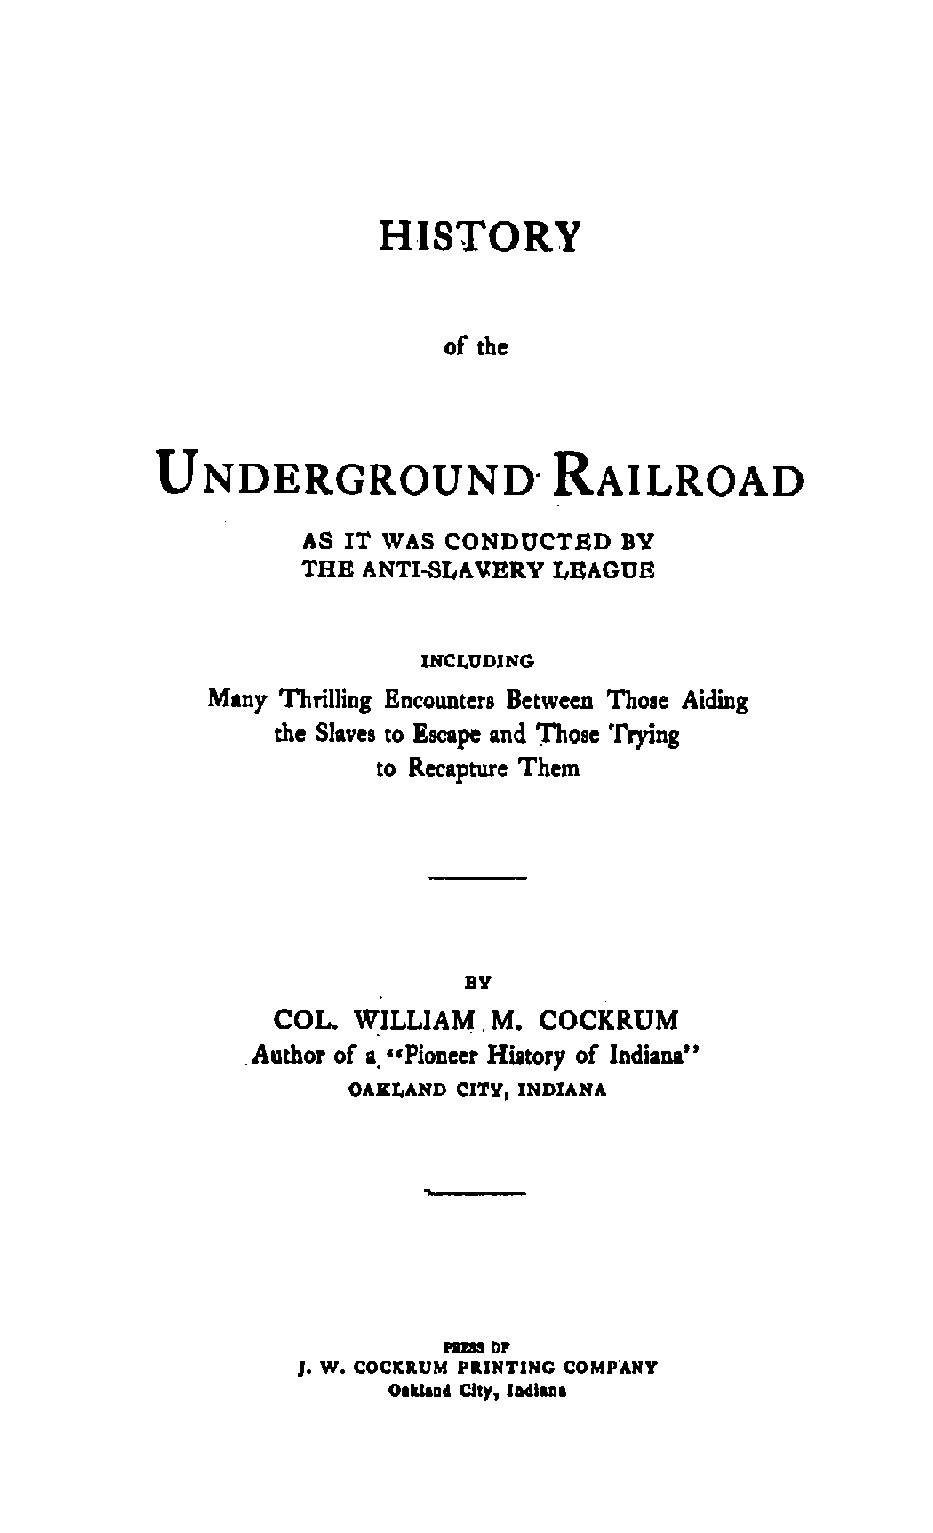 History of the Underground Railroad as it was conducted by the Anti-Slavery League : including many thrilling encounters between those aiding the slaves to escape and those trying to recapture them Preview